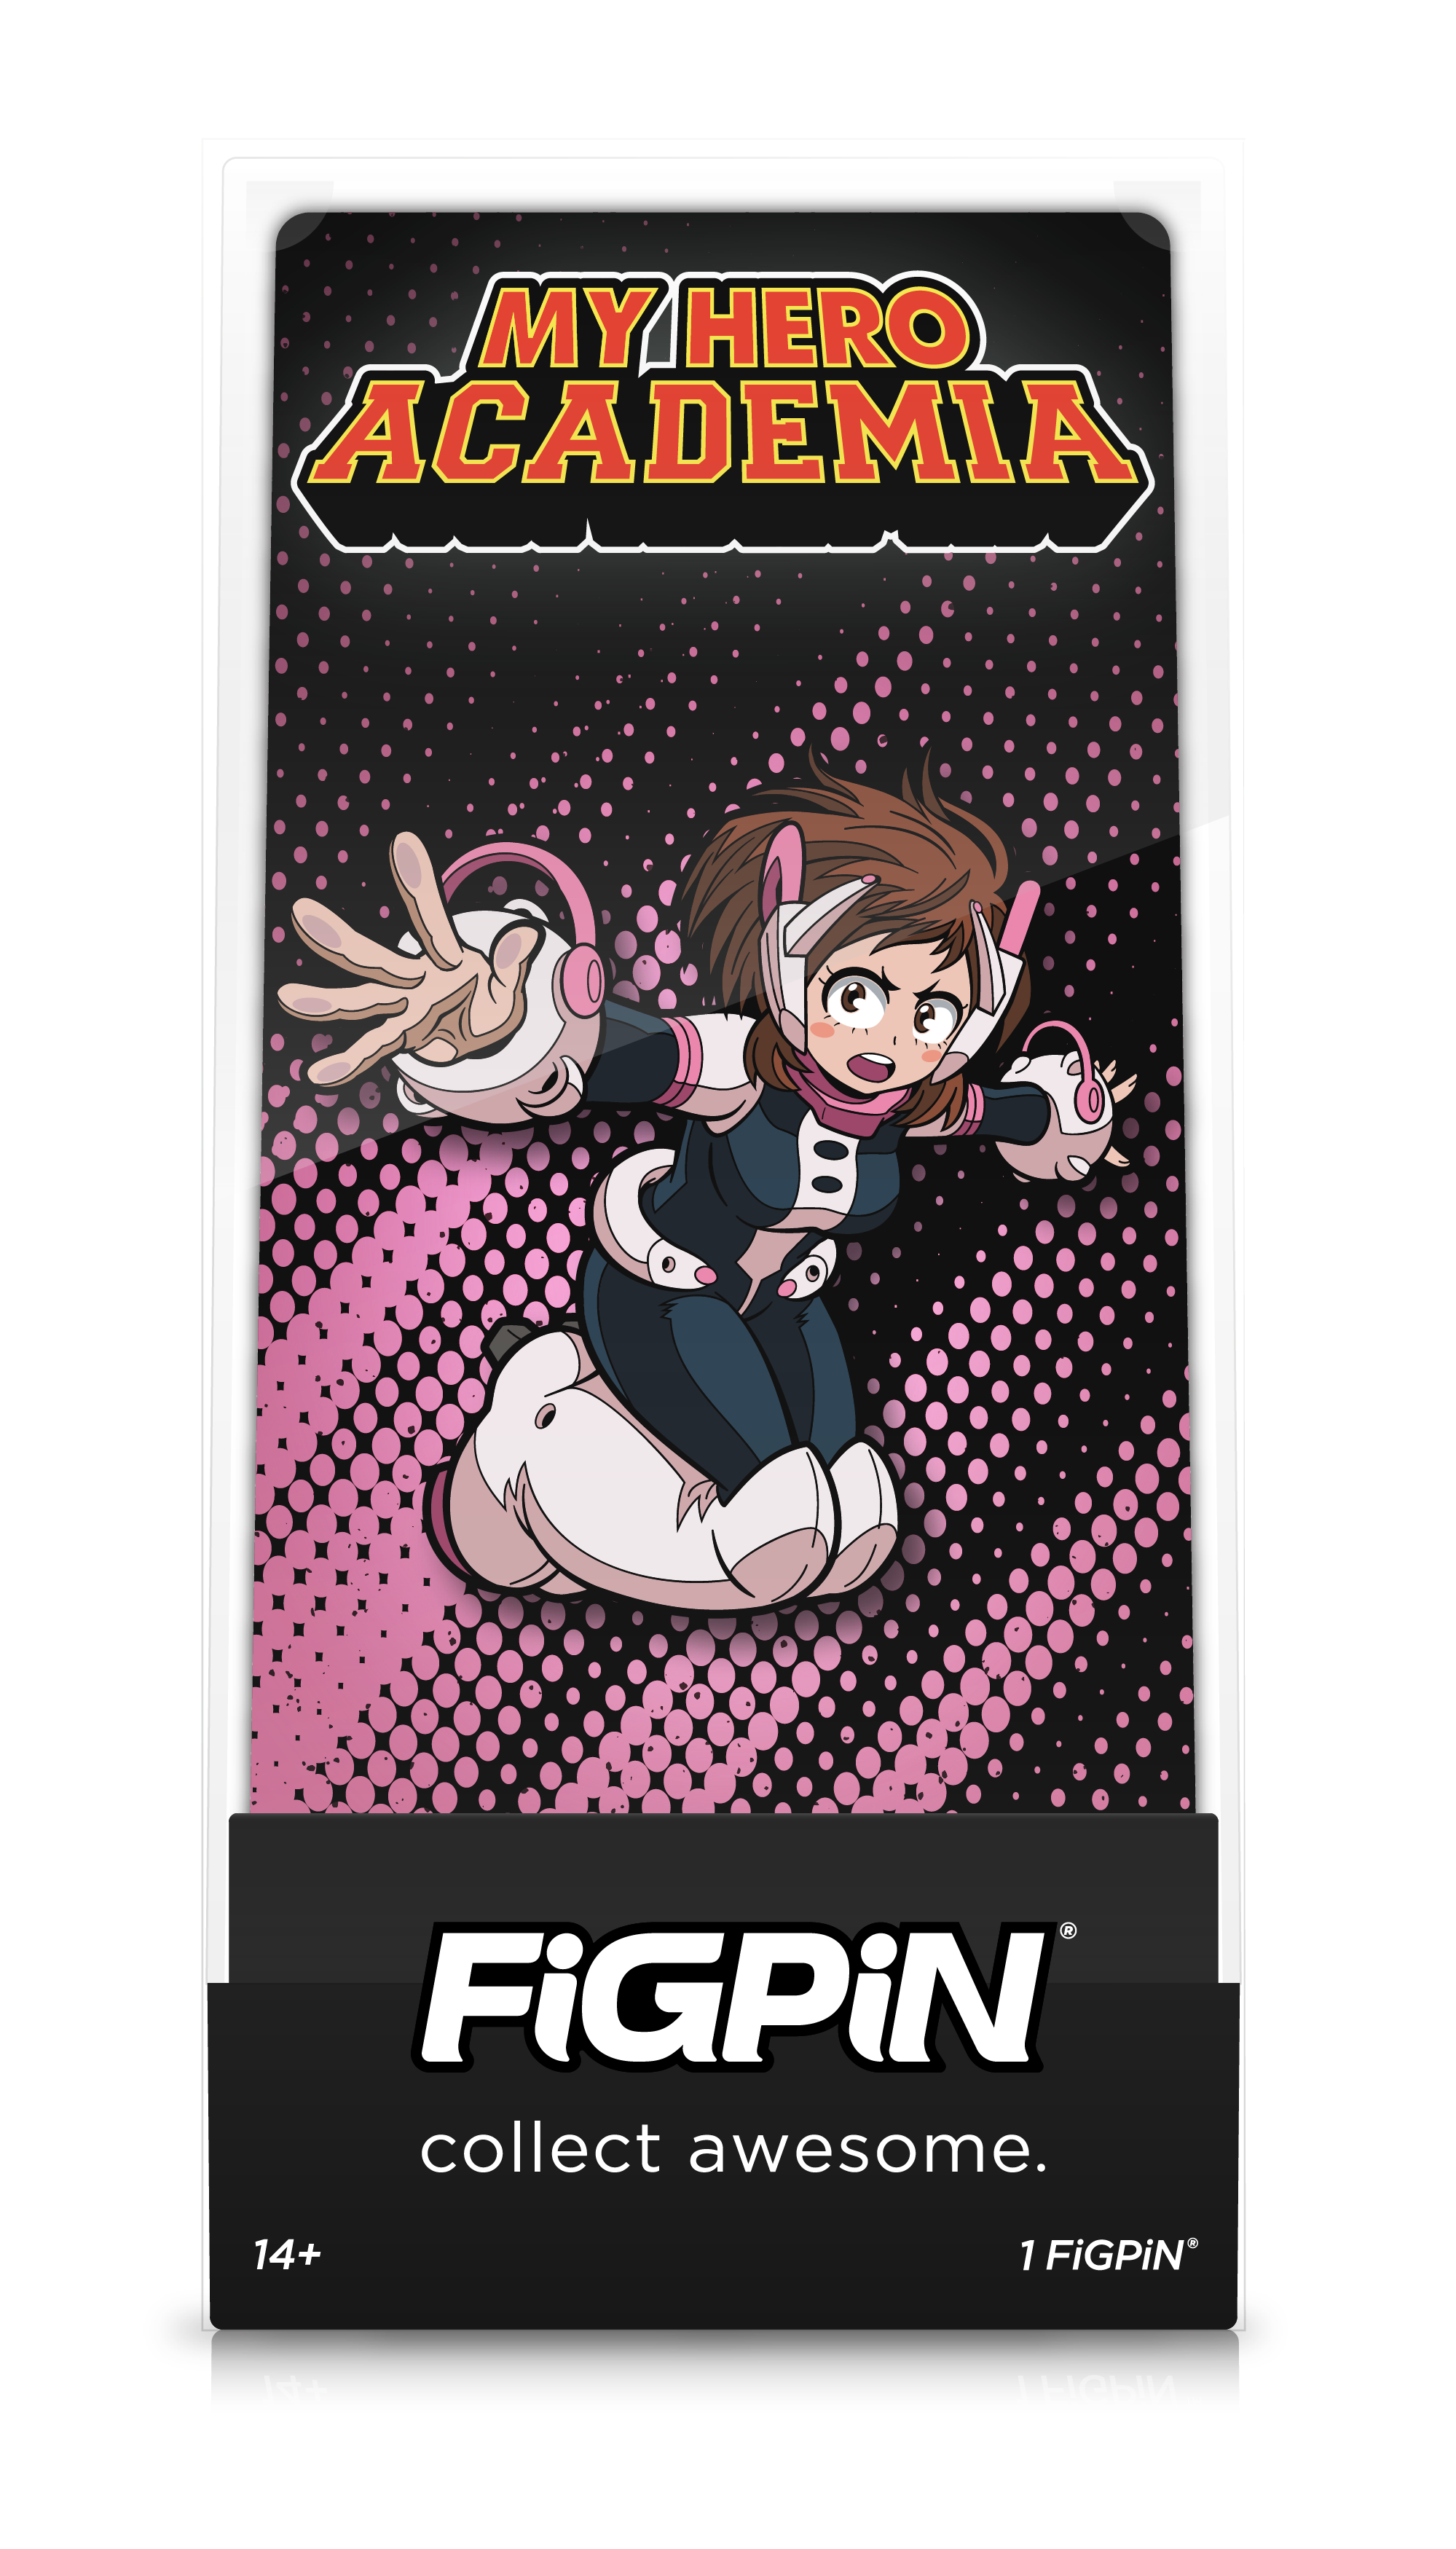 Front view of My Hero Academia's Ochaco Uraraka enamel pin inside FiGPiN Display case reading “collect awesome"